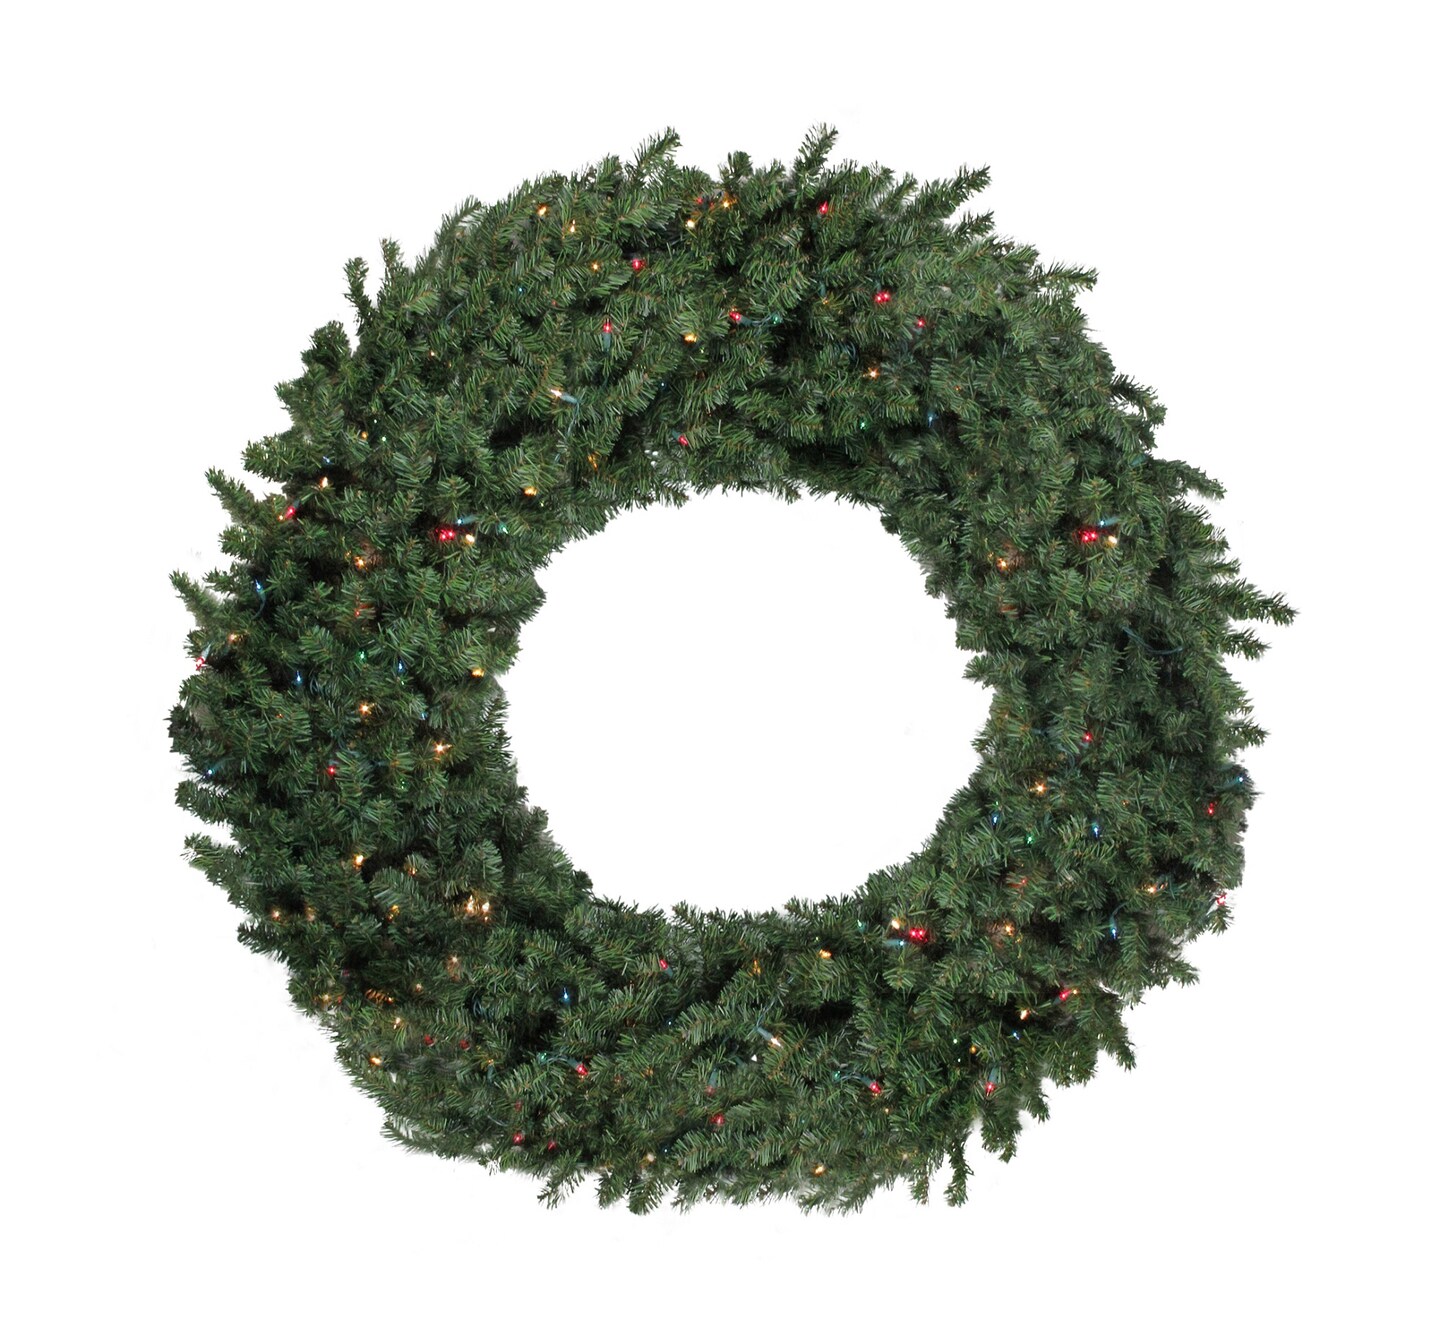 Northlight Pre-Lit Commercial Size Canadian Pine Christmas Wreath - 10ft, Multicolor Lights